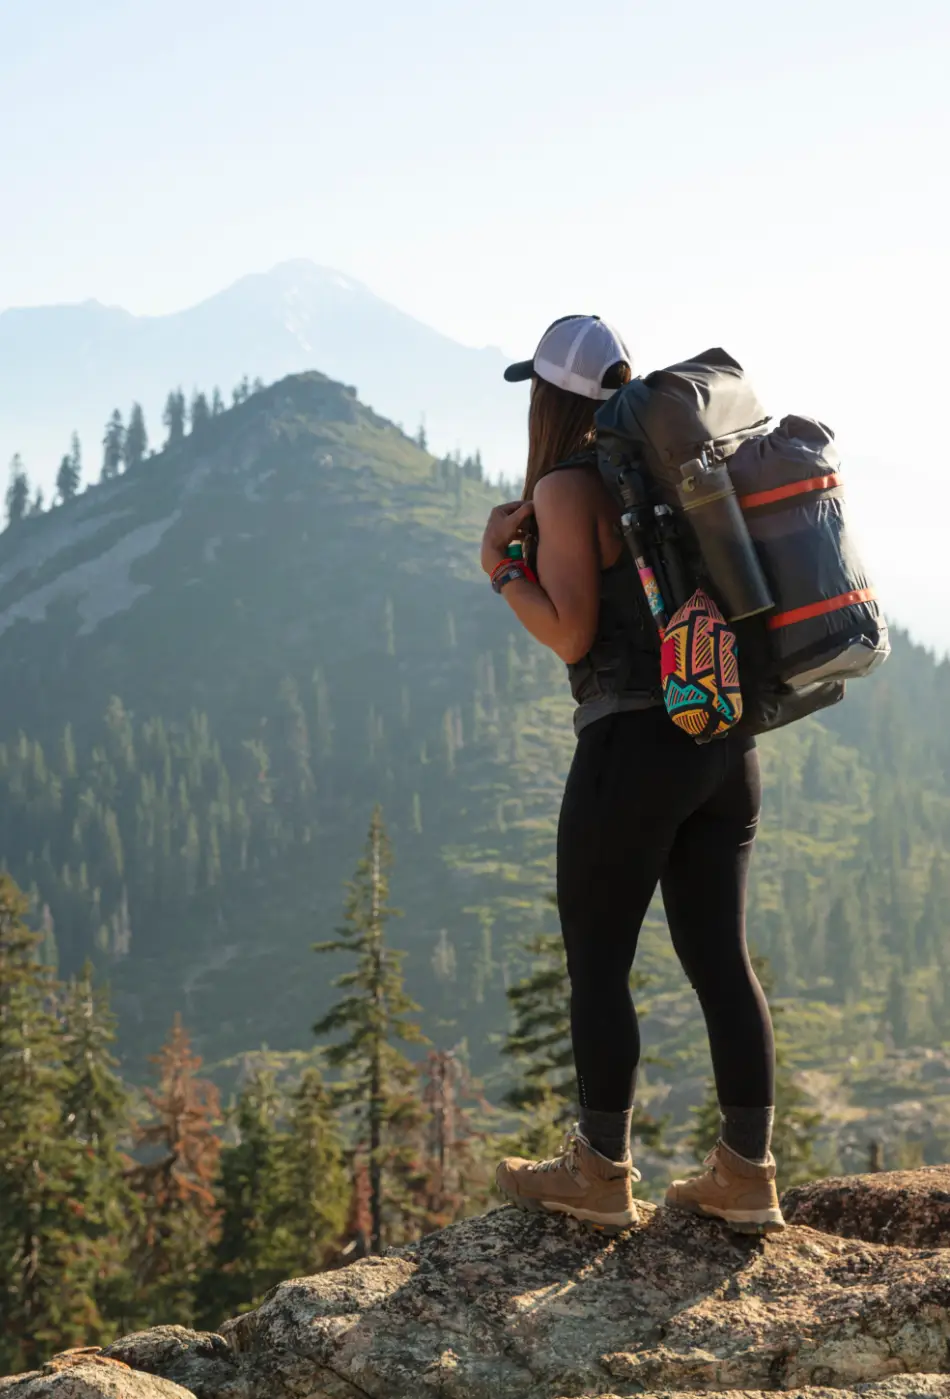 View of a woman as she looks the horizon. She has on her back a very large back pack with various day hike items. She is wearing a trucker baseball hat, black leggings and hiking boots.